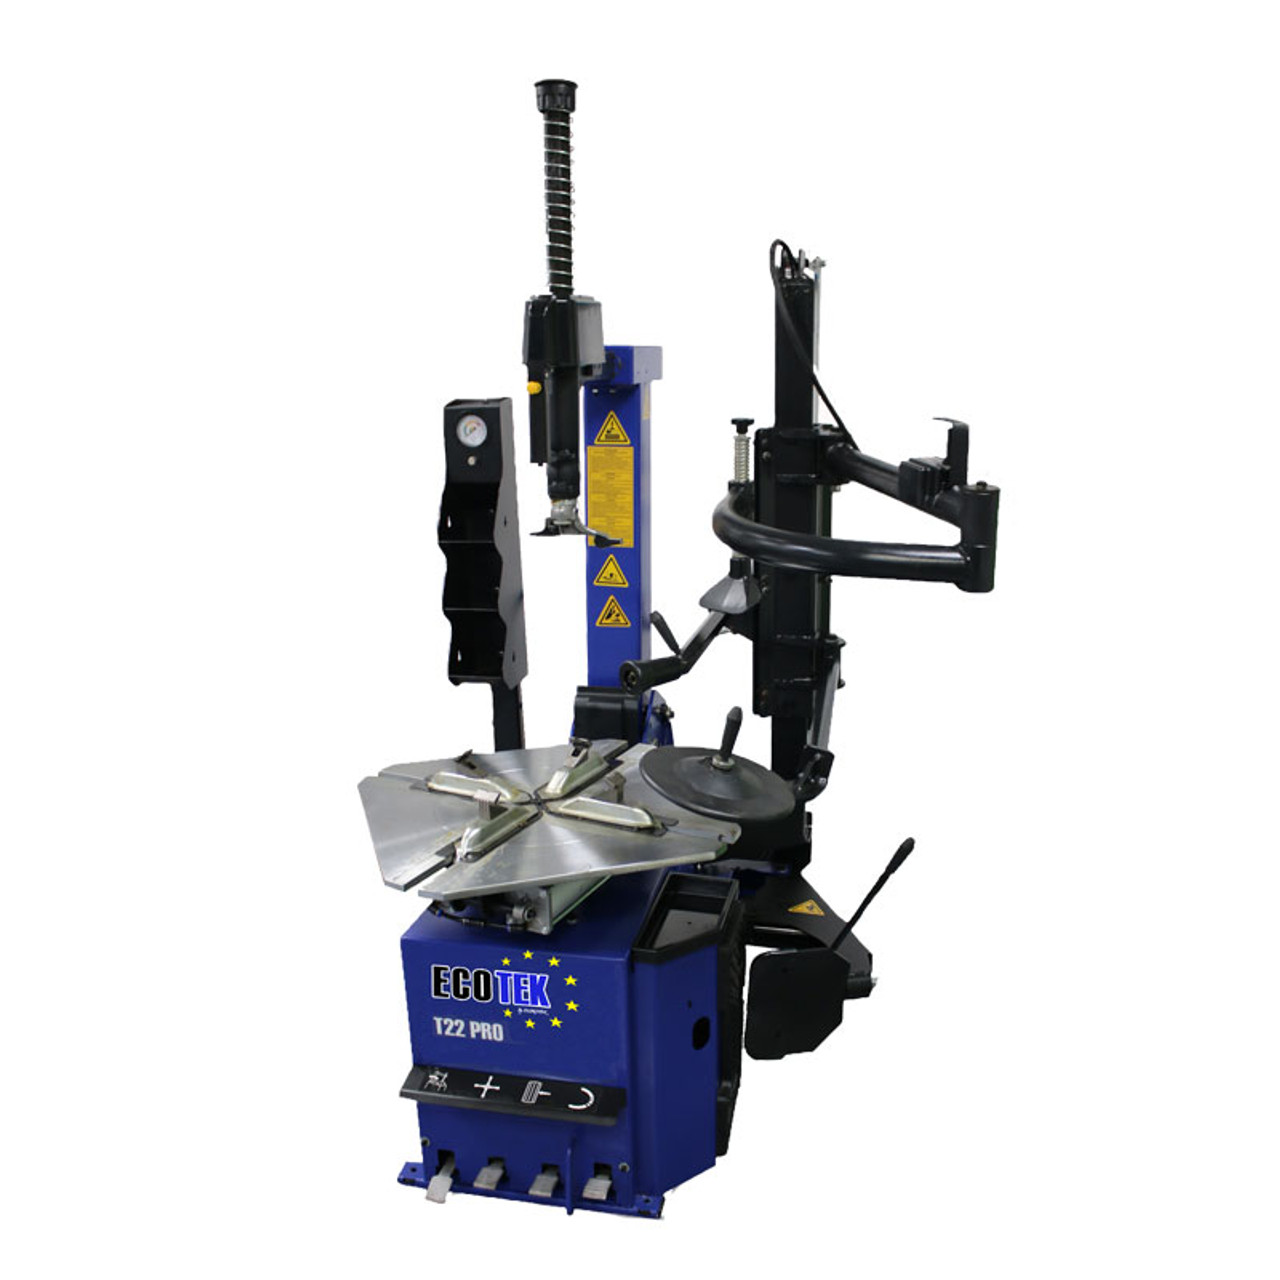 T22 Pro Fully Automatic Tyre Changer MK 2